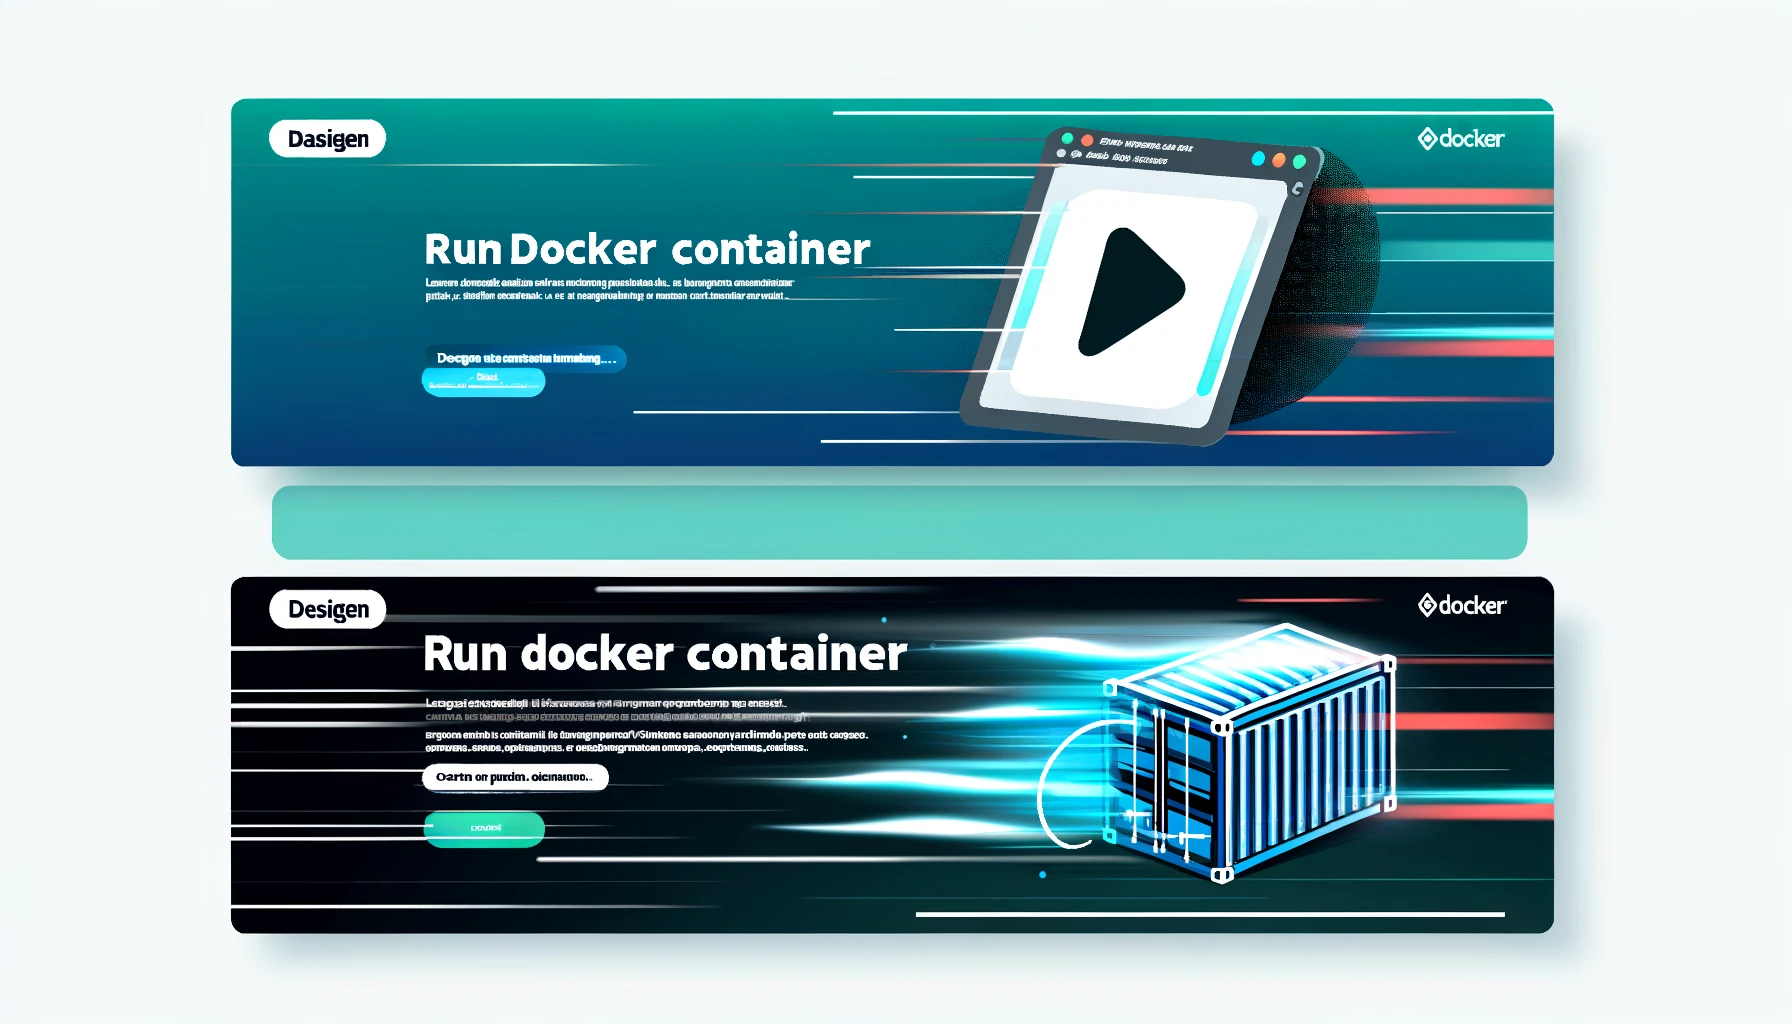 Lesson 4 - Running a Docker Container